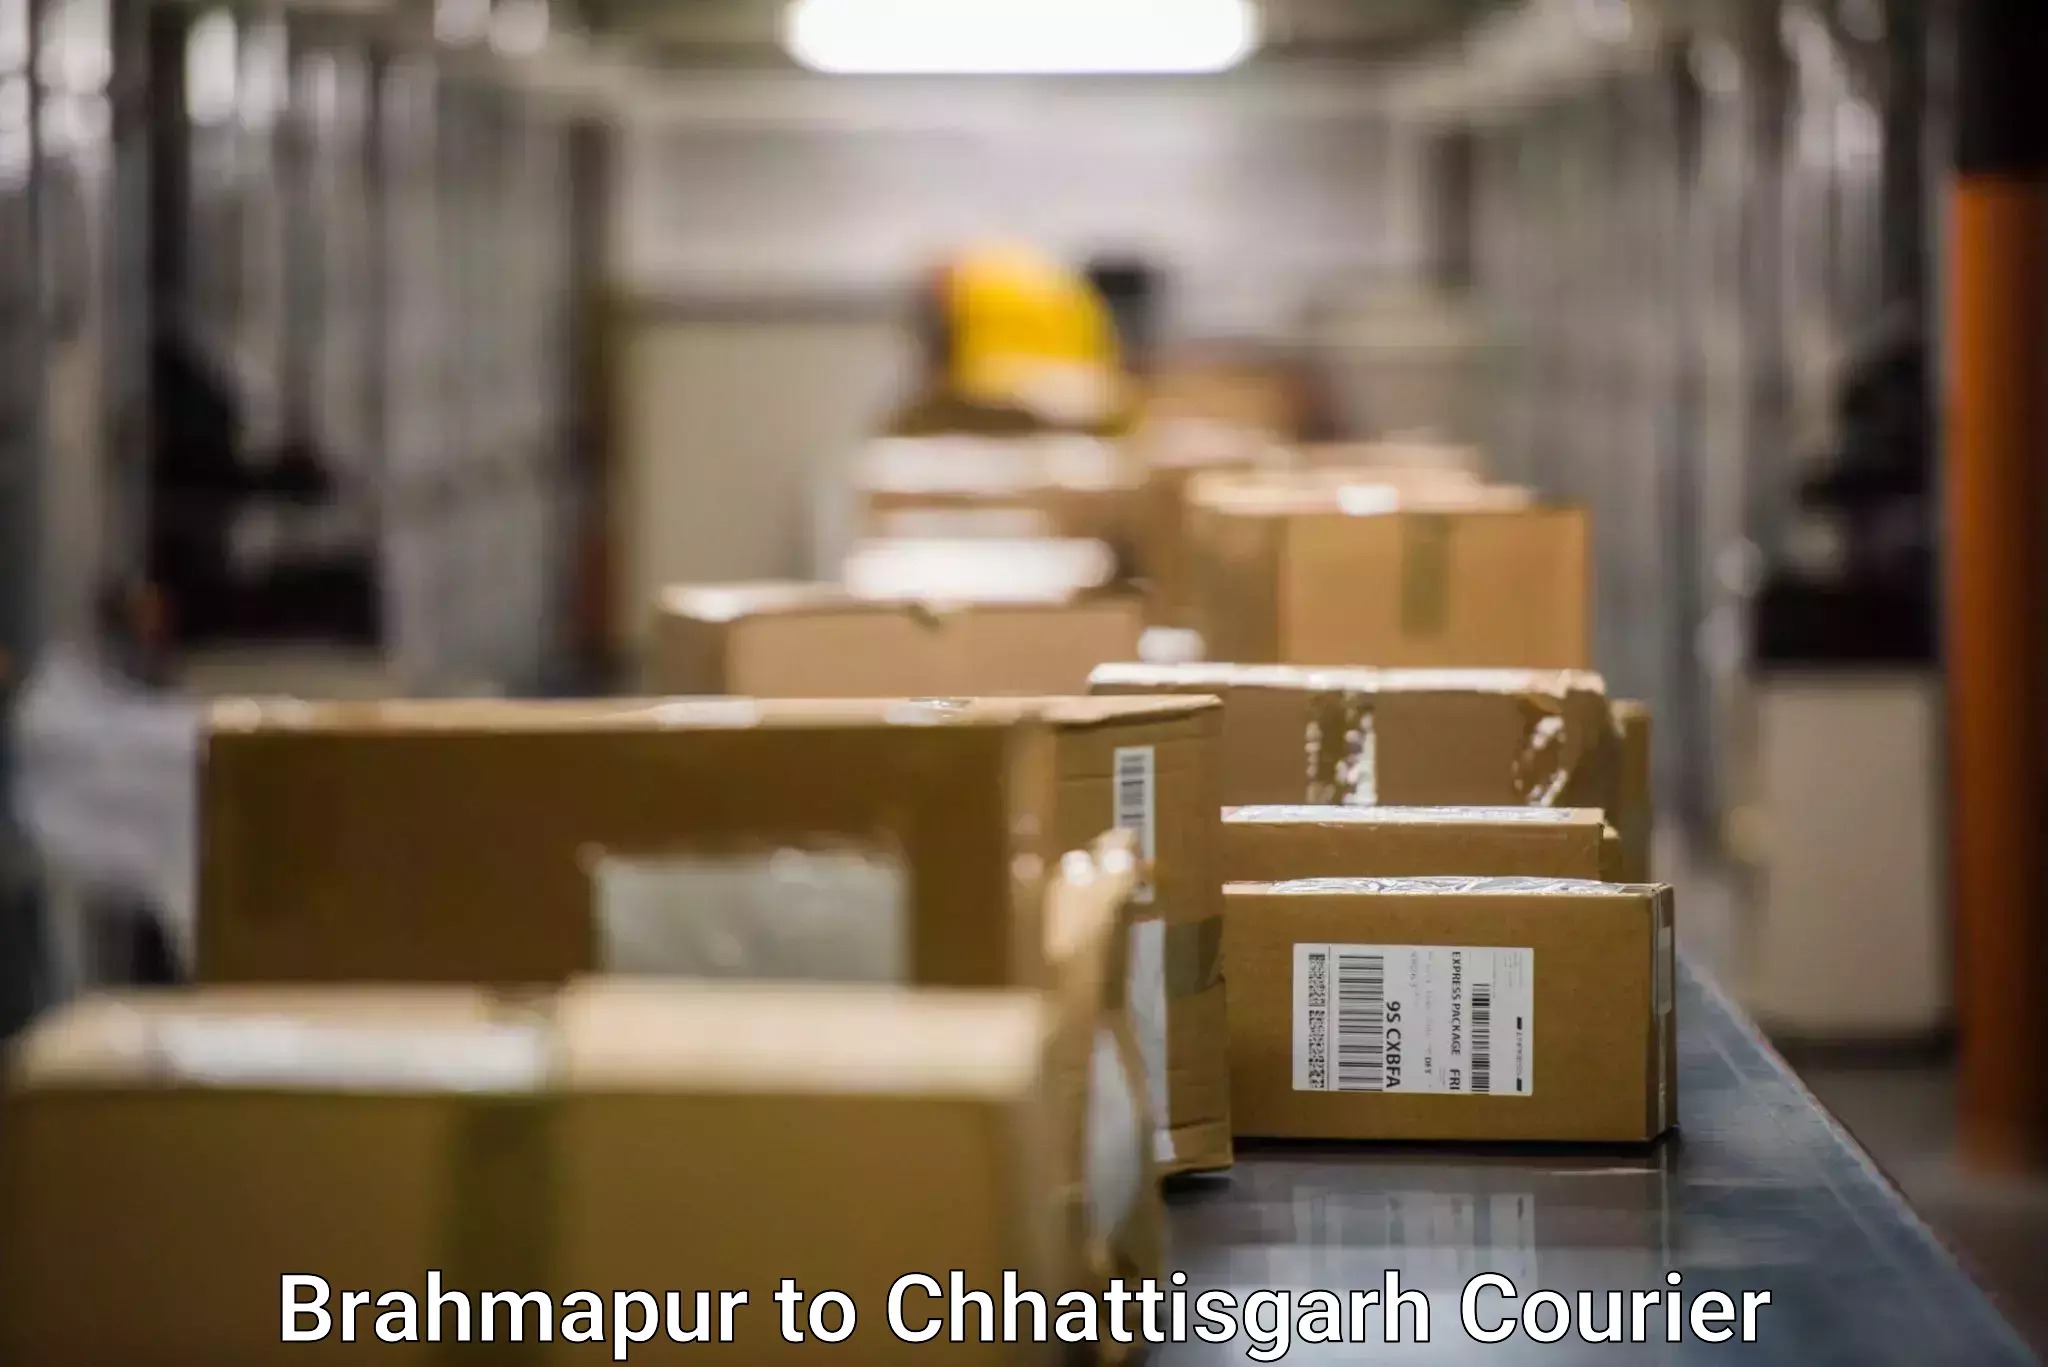 State-of-the-art courier technology Brahmapur to Dhamtari